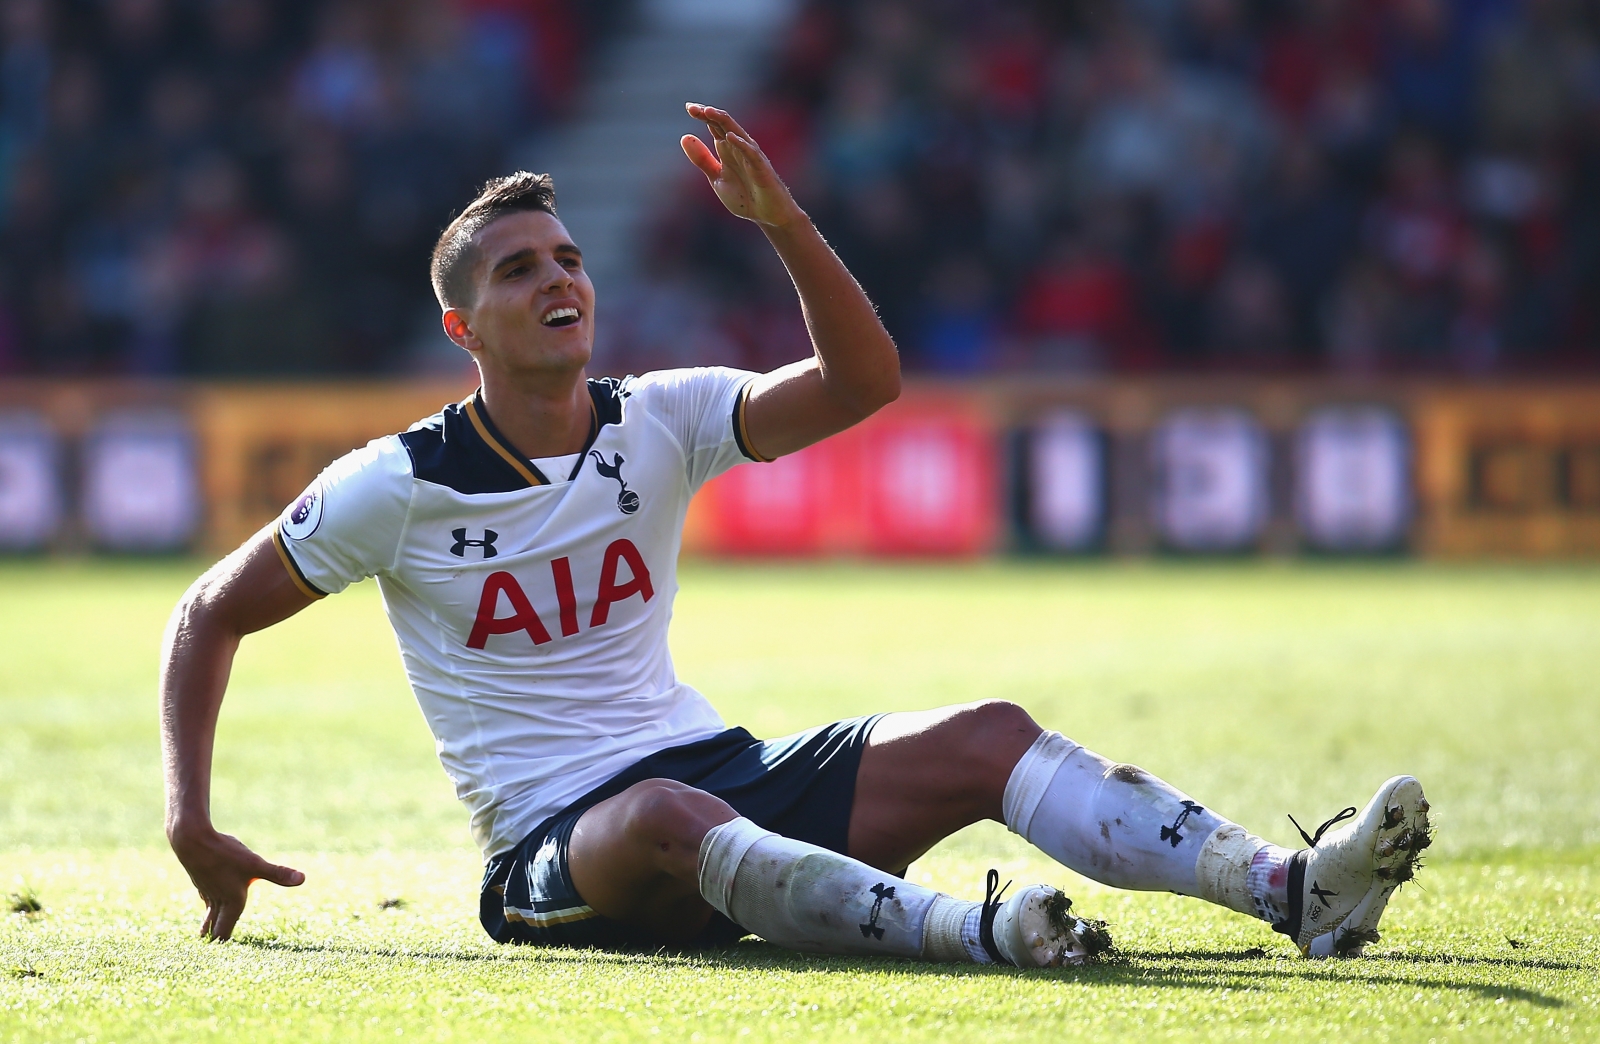 Tottenham winger Erik Lamela ruled out for the season after surgery agreed